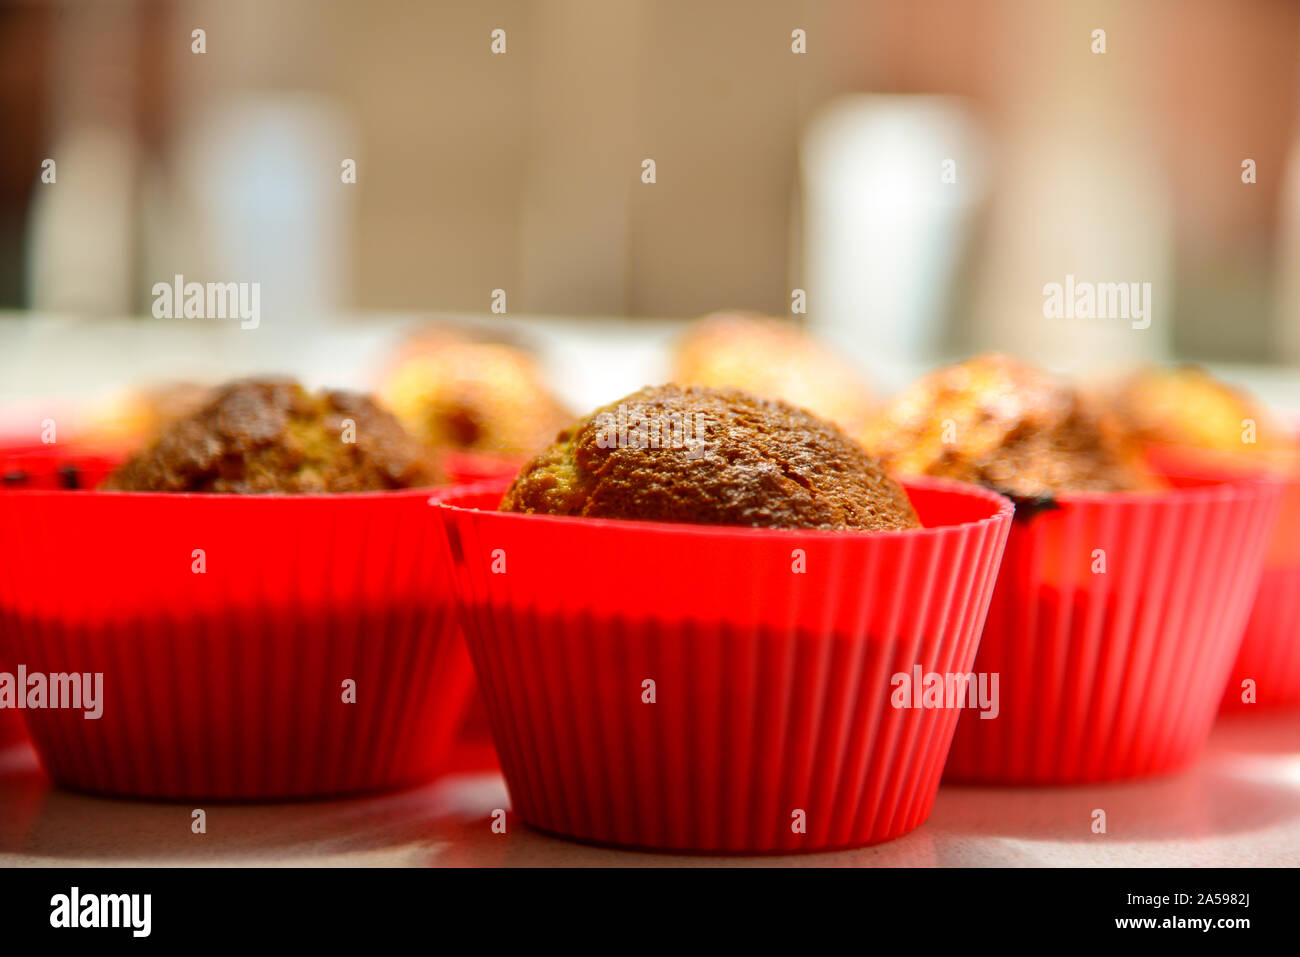 Freshly baked cupcakes in red silicone cups in kitchen sunlight Stock Photo